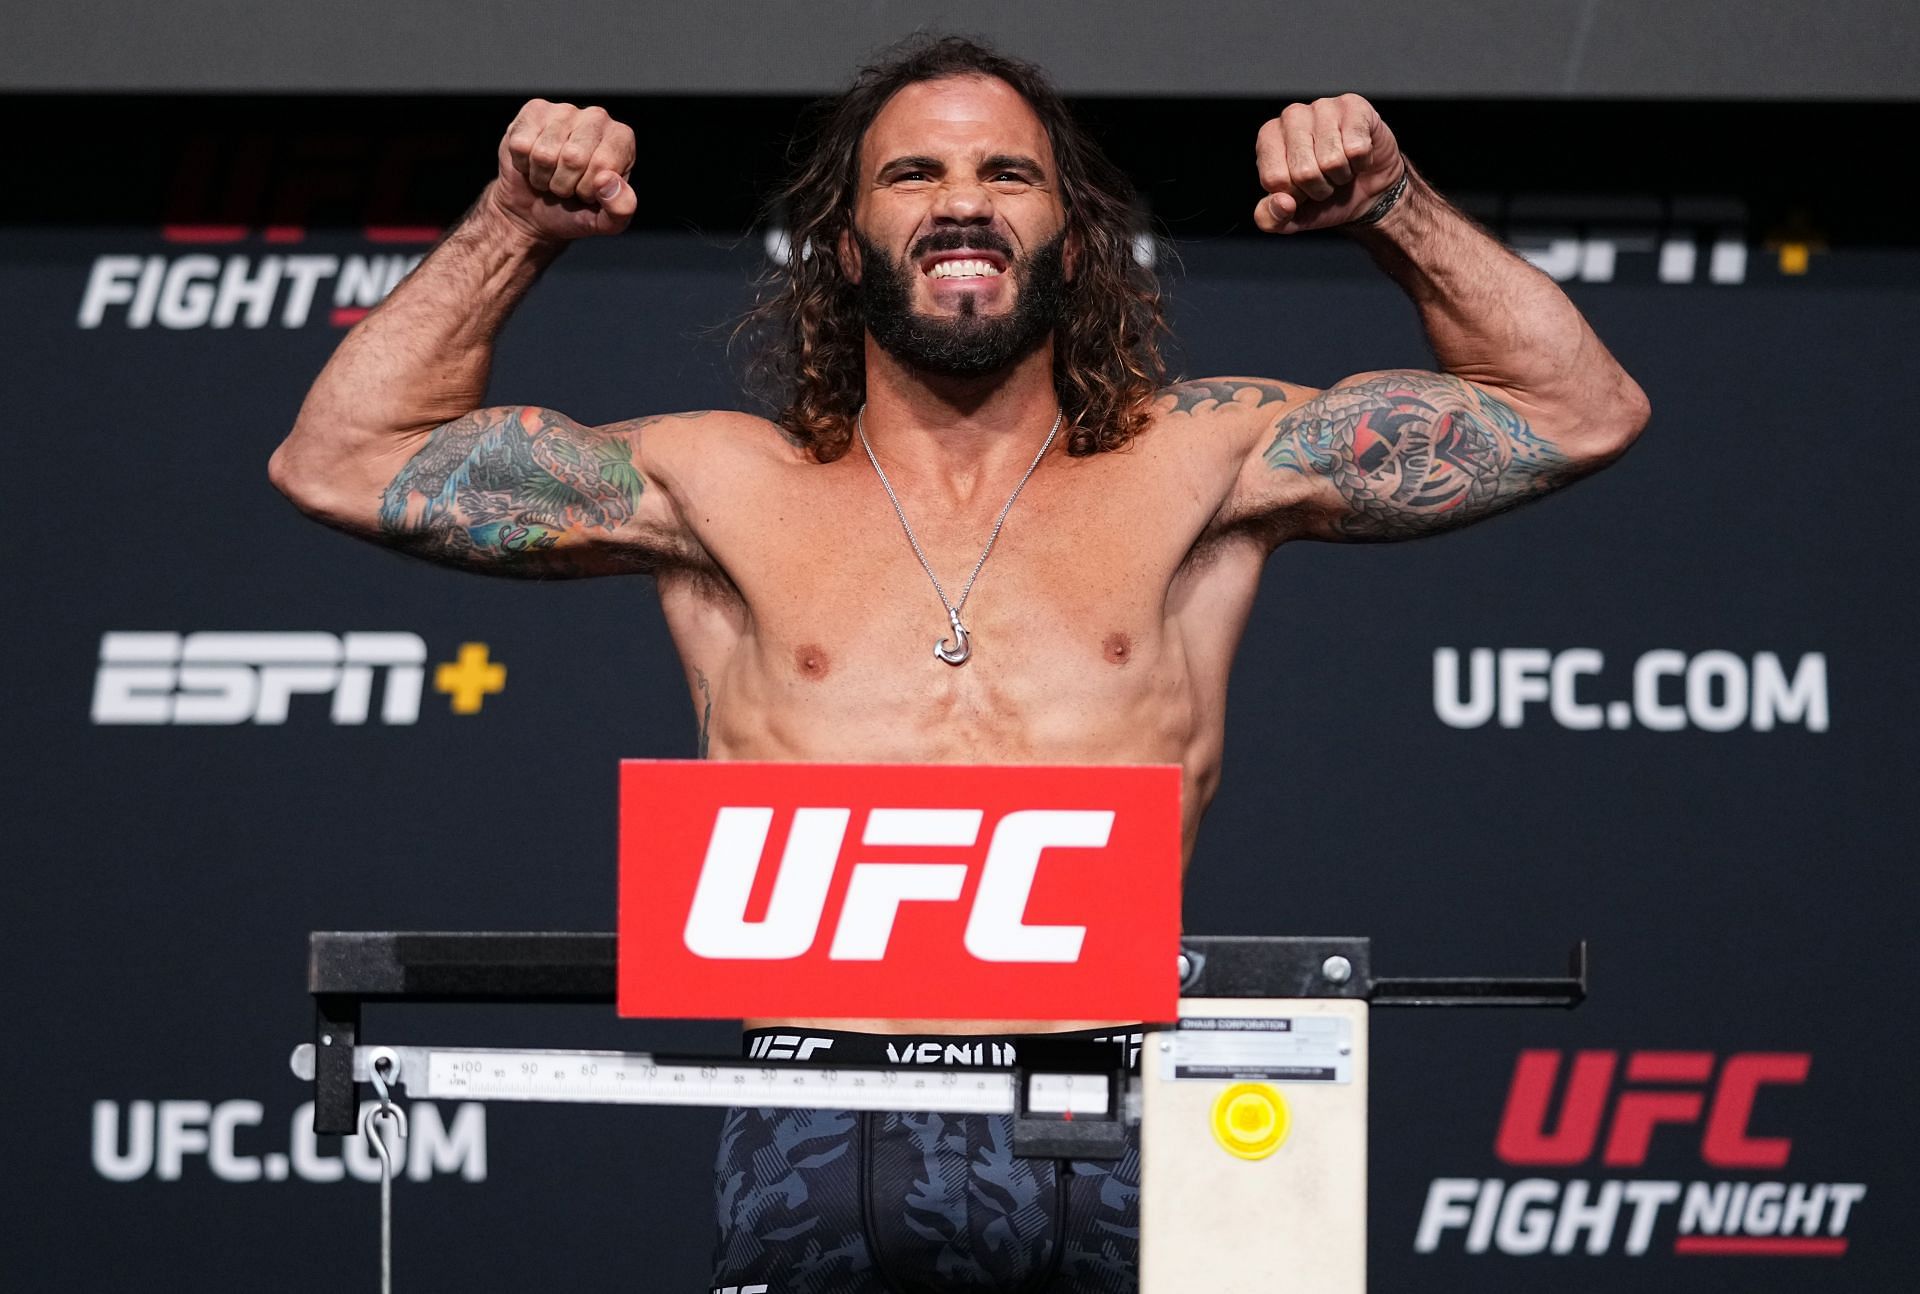 Clay Guida was inducted into the Hall of Fame for his bout with Diego Sanchez